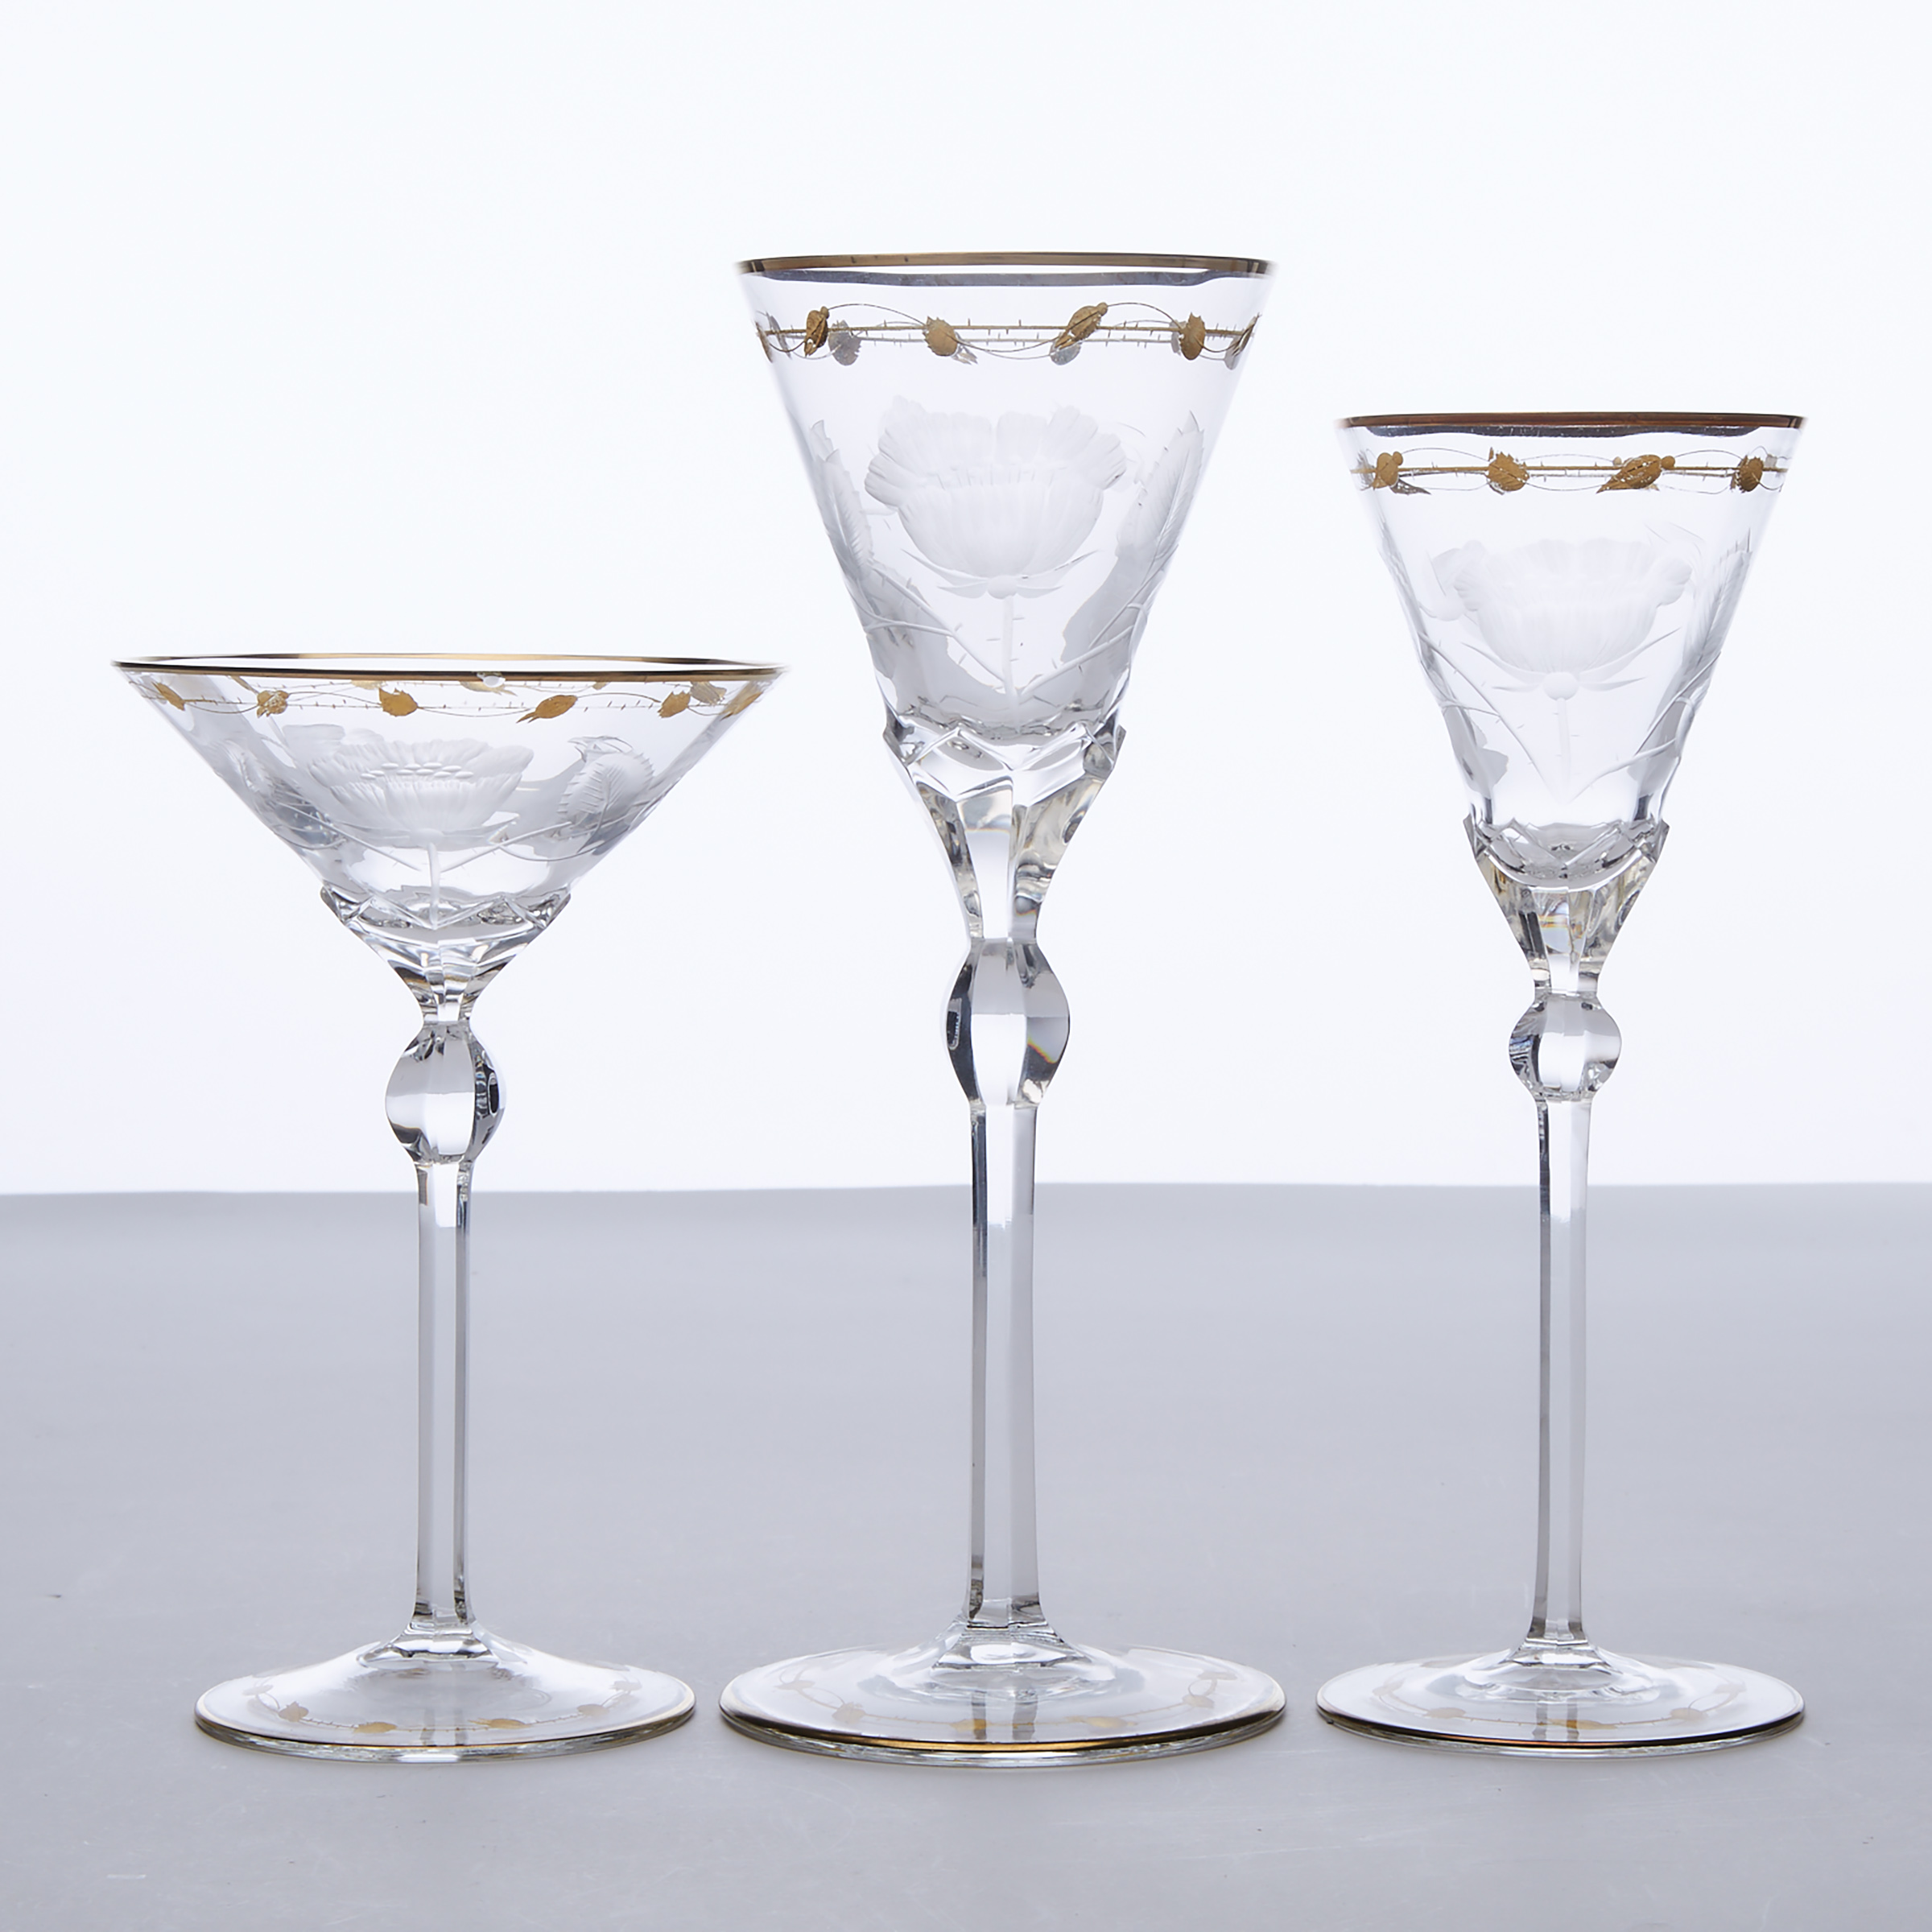 Moser ‘Paula’ Pattern Cut, Engraved and Gilt Glass Service, 20th century